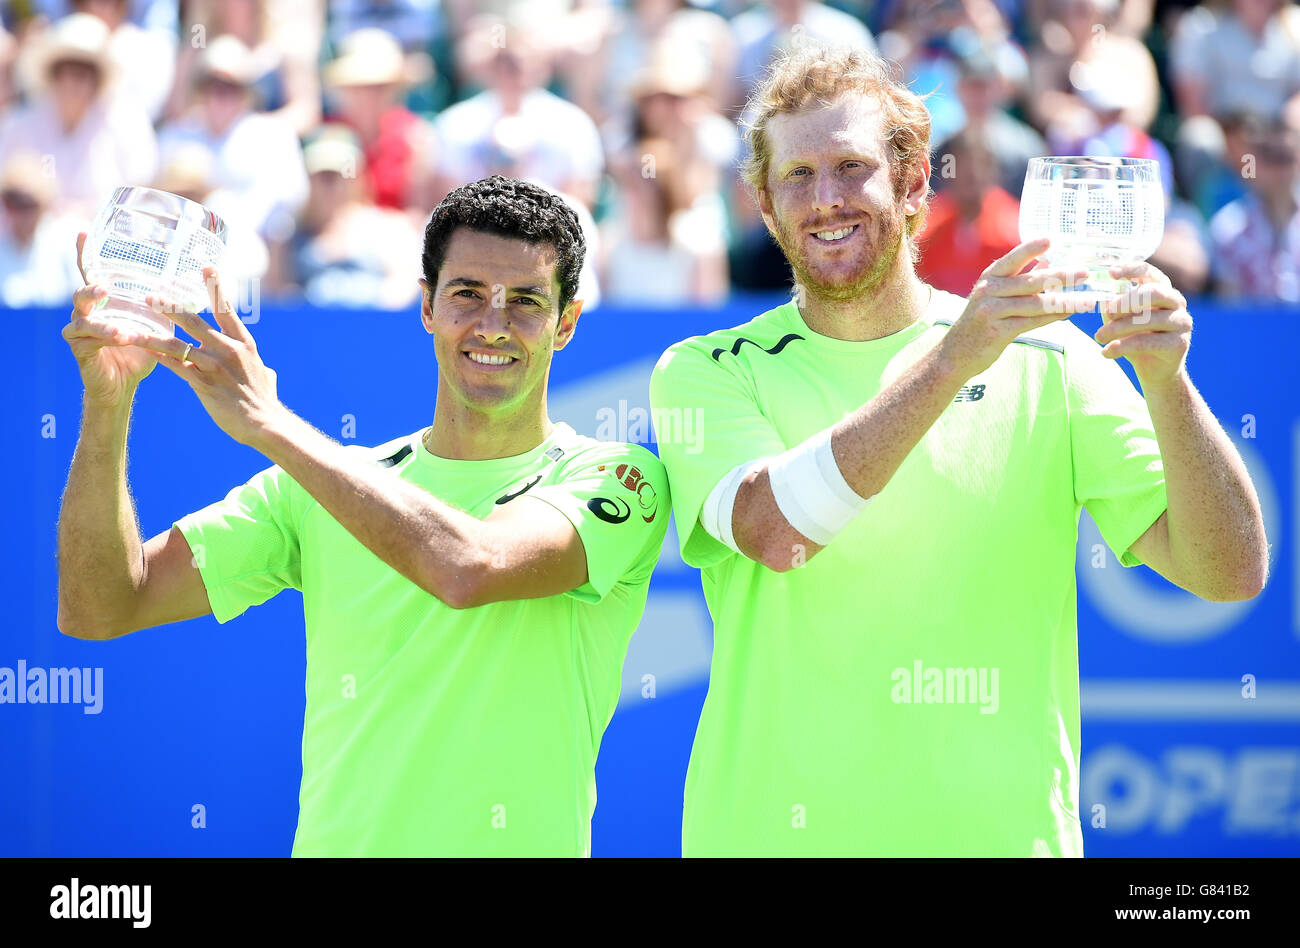 Andre Sa (left) and Chris Guccione celebrate with their trophies after winning the Doubles Final at the AEGON Open Nottingham. Stock Photo